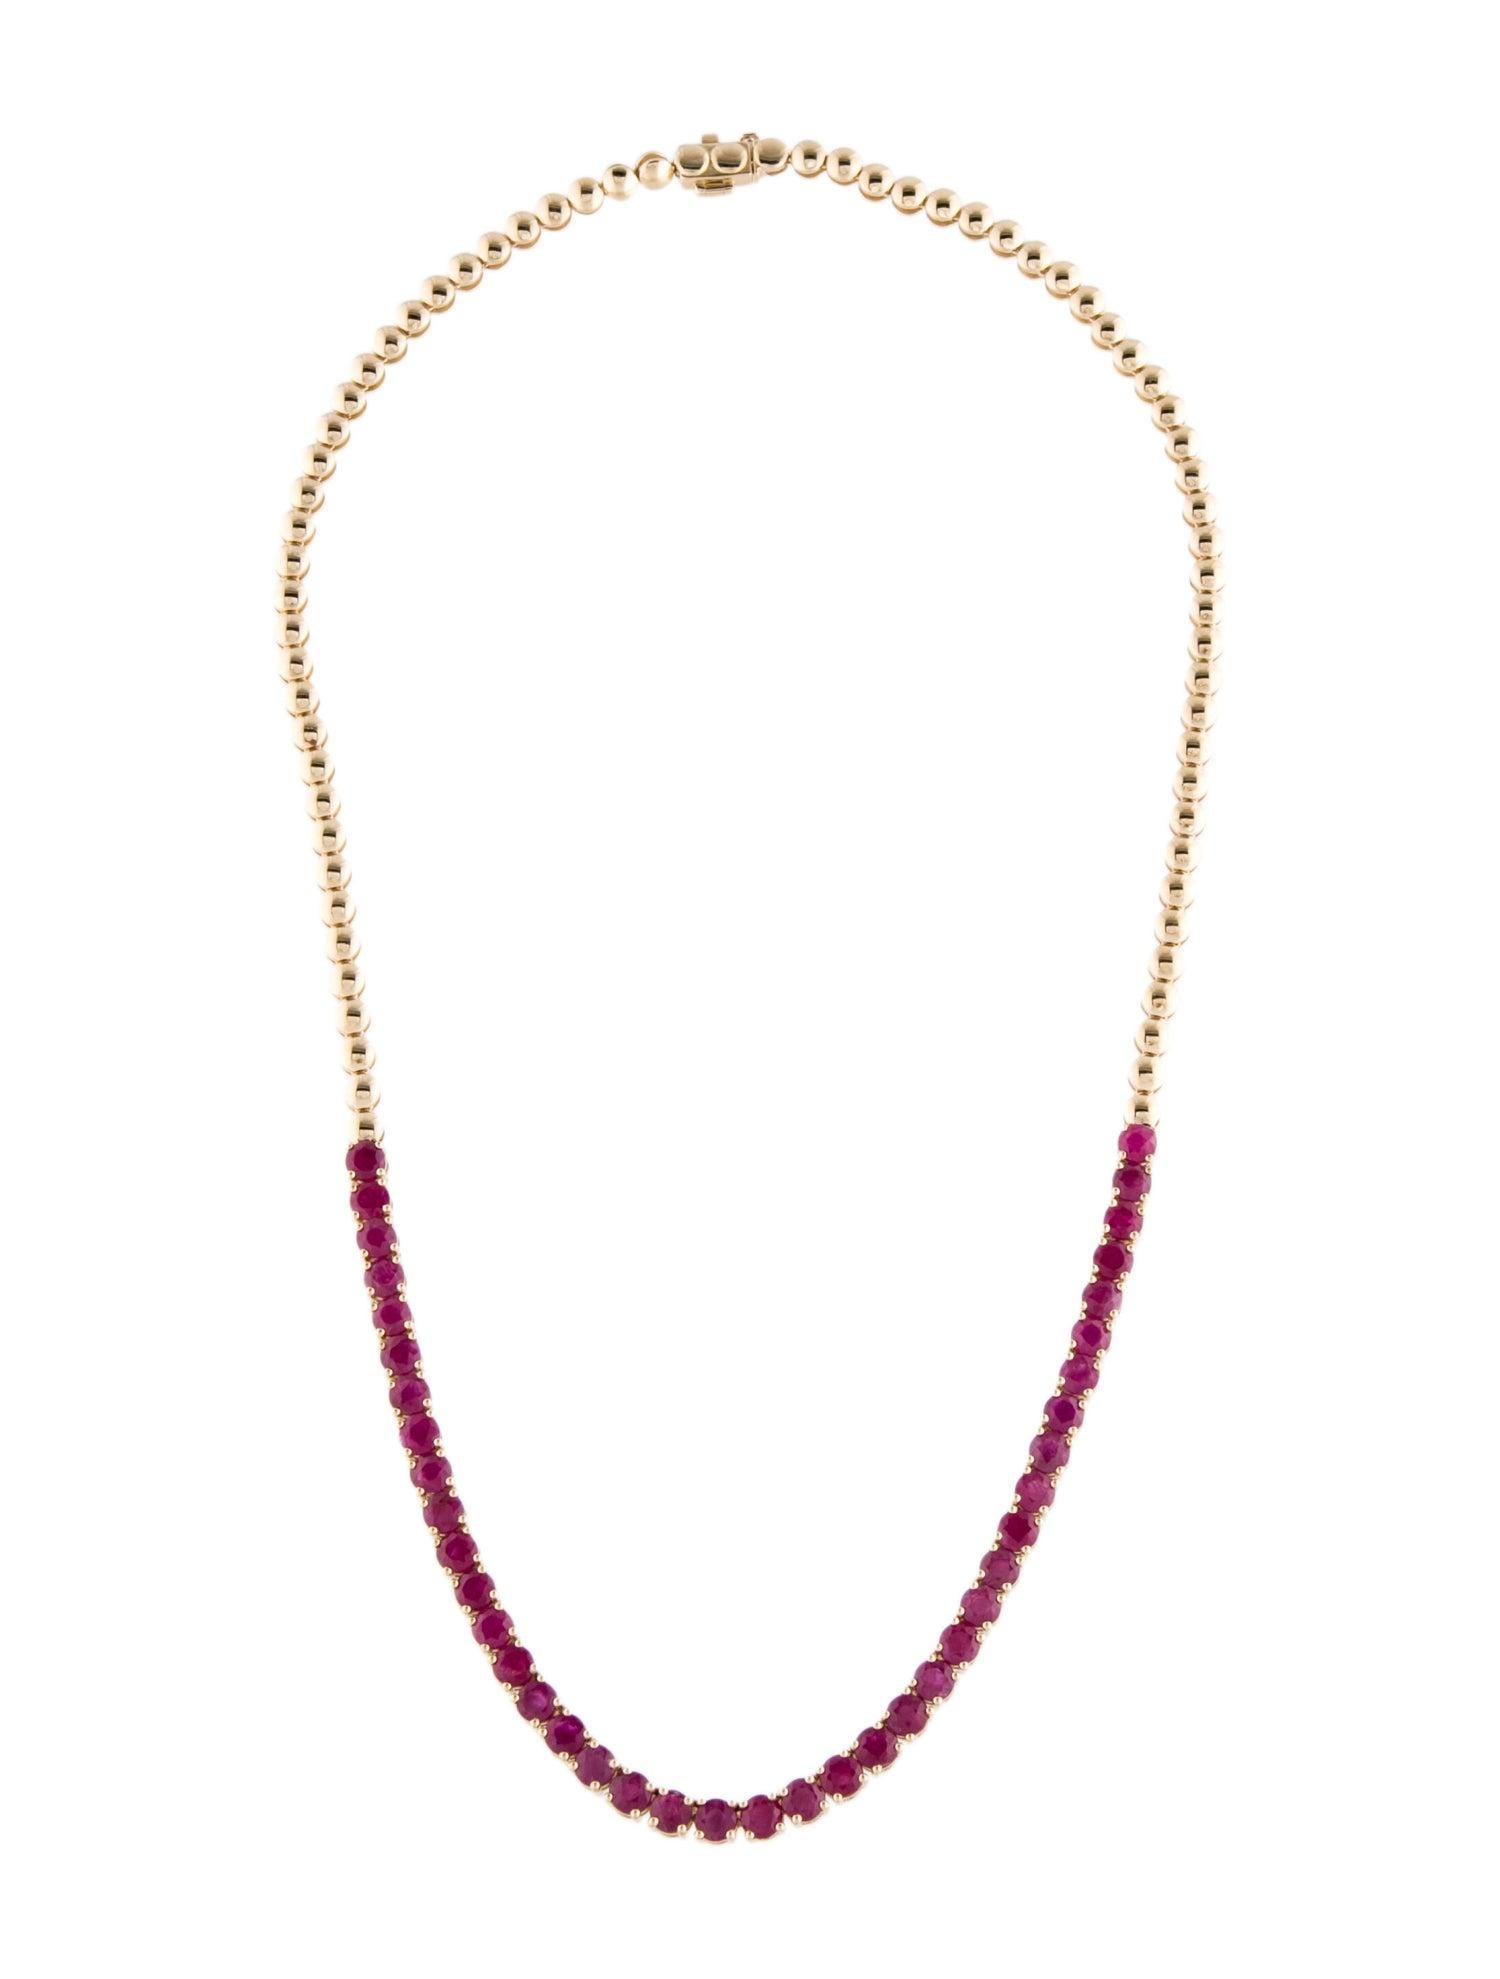 Evoke the fiery passion of nature's most vibrant blooms with our exquisite Passion Blooms Ruby Necklace. Crafted by Jeweltique, a brand steeped in over 50 years of heritage, this piece is a celebration of timeless beauty and craftsmanship.

The